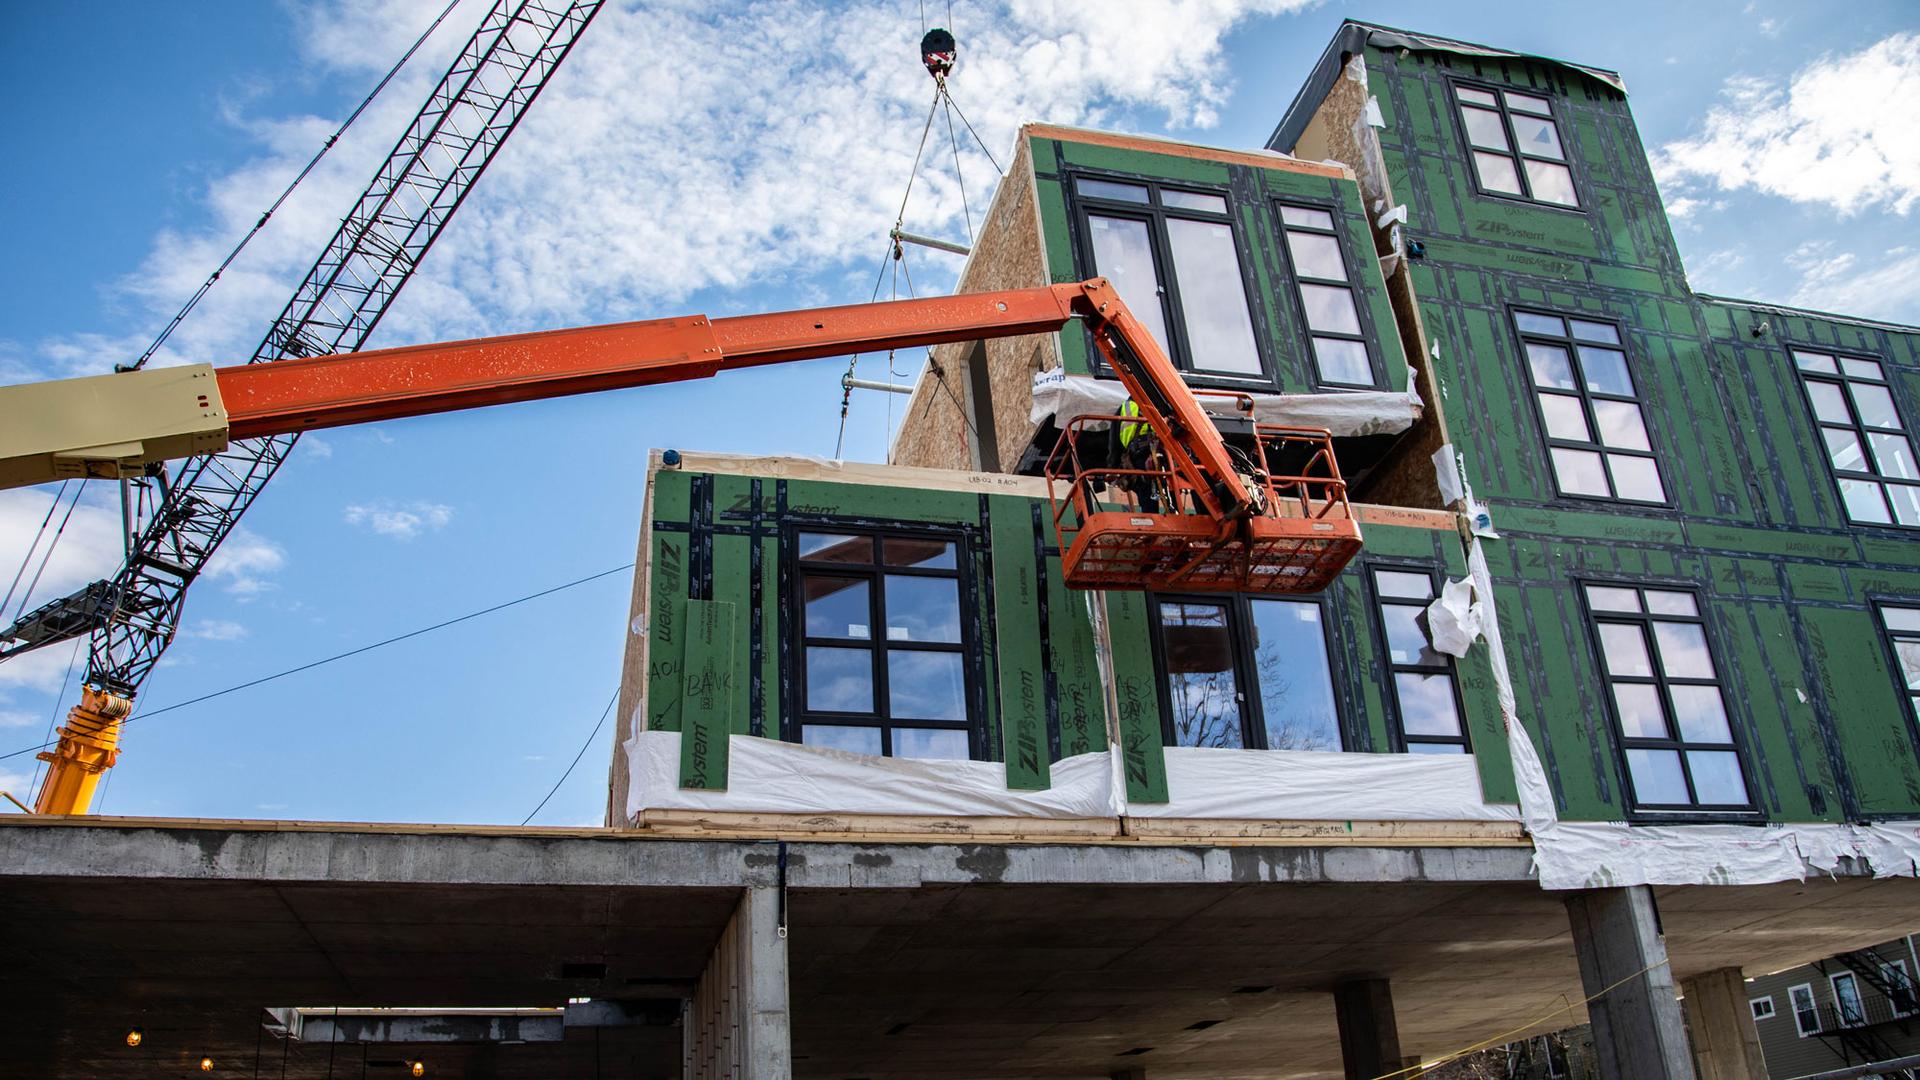 A 65 by 13 foot modular unit is shown with a green insulated side and windows, dangling from a crane.